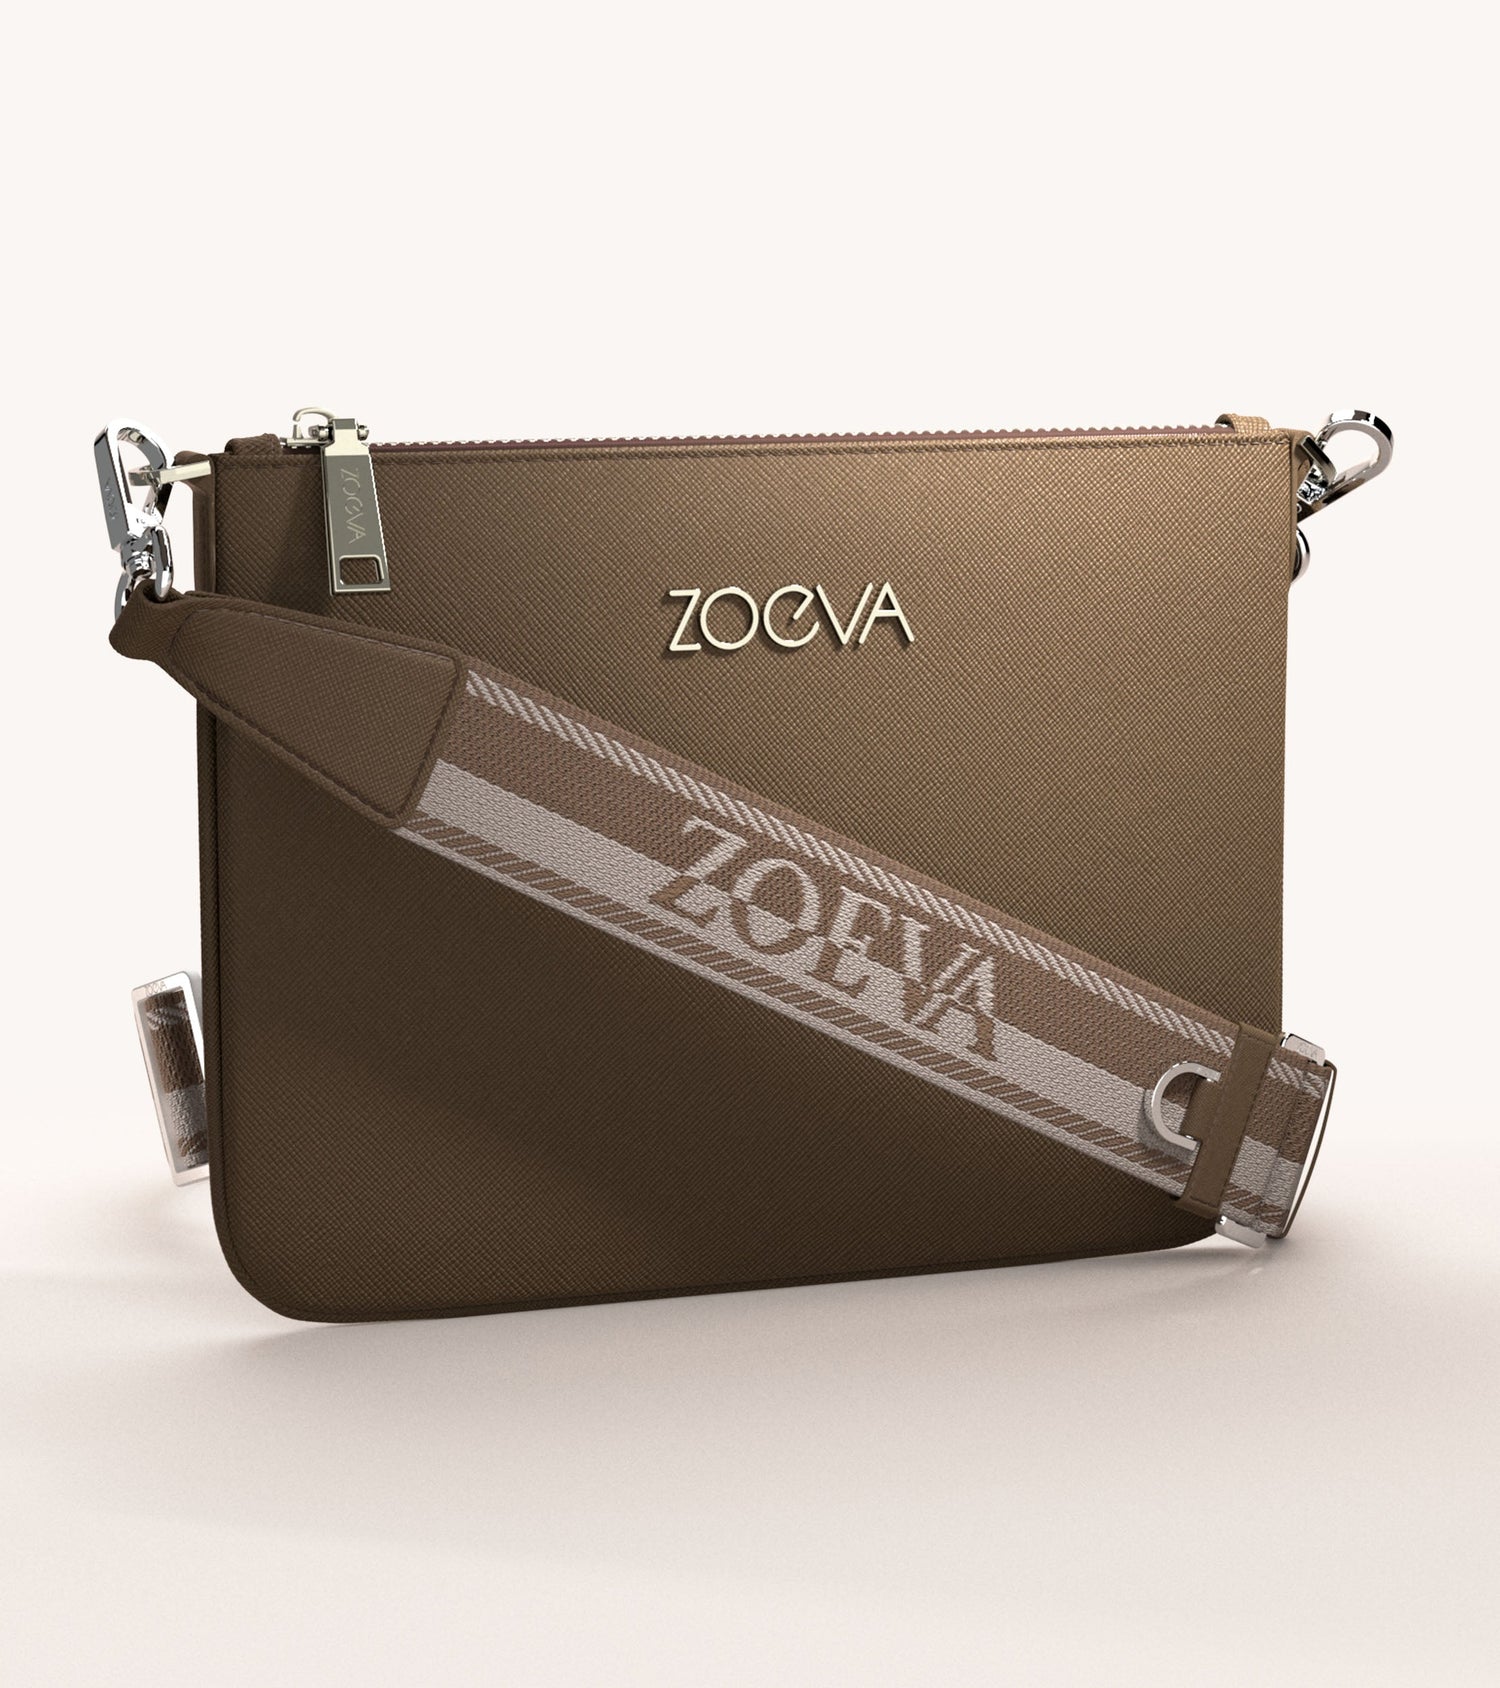 The Everyday Clutch & Shoulder Strap (Light Chocolate) Main Image featured